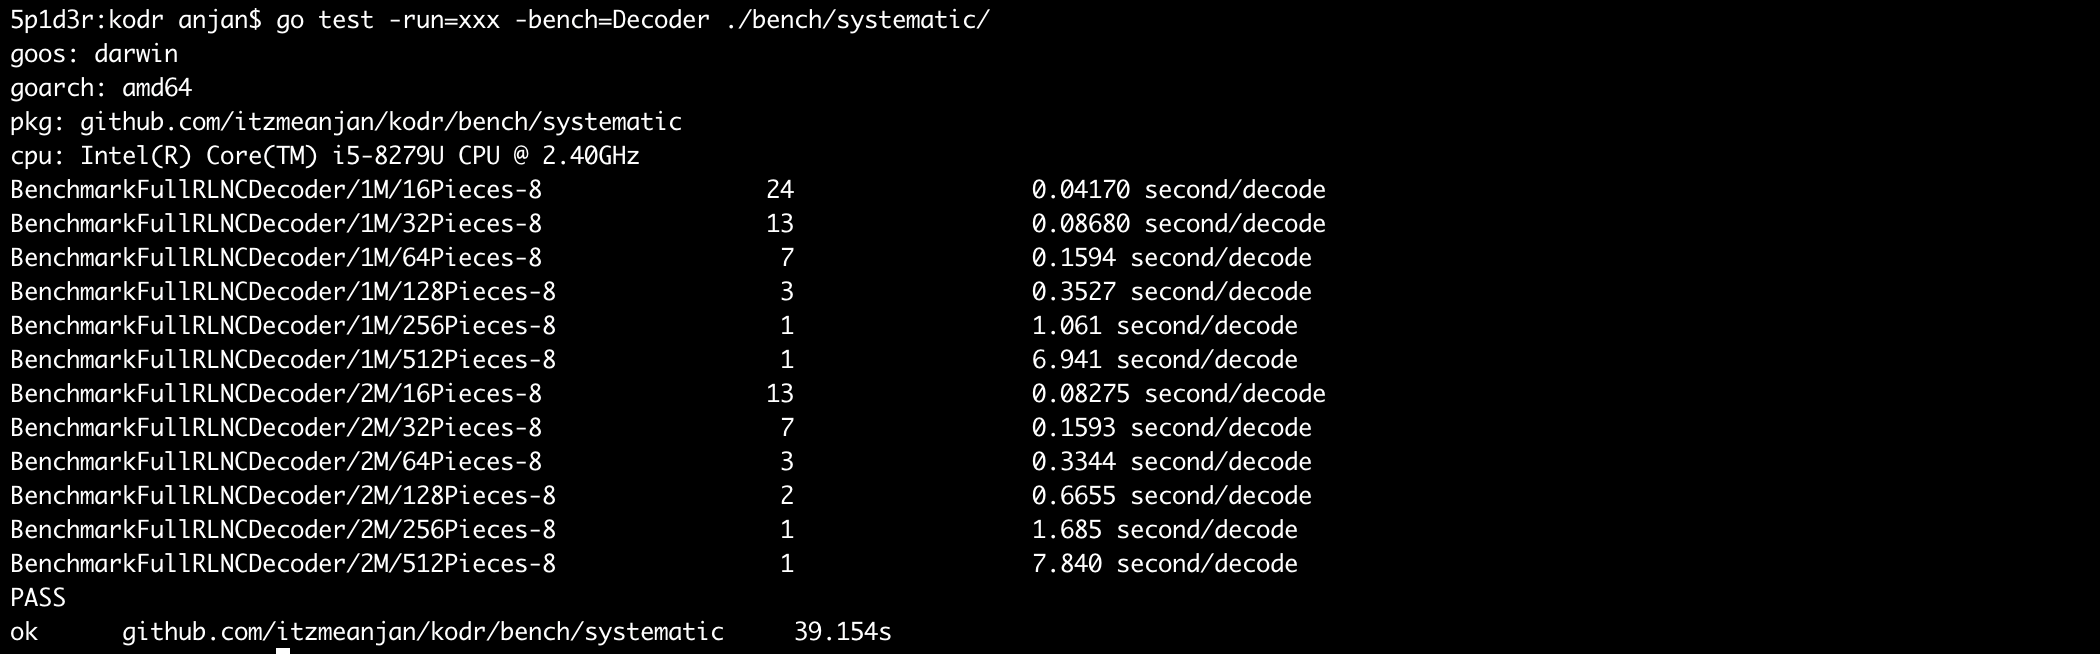 benchmark_systematic_decoder